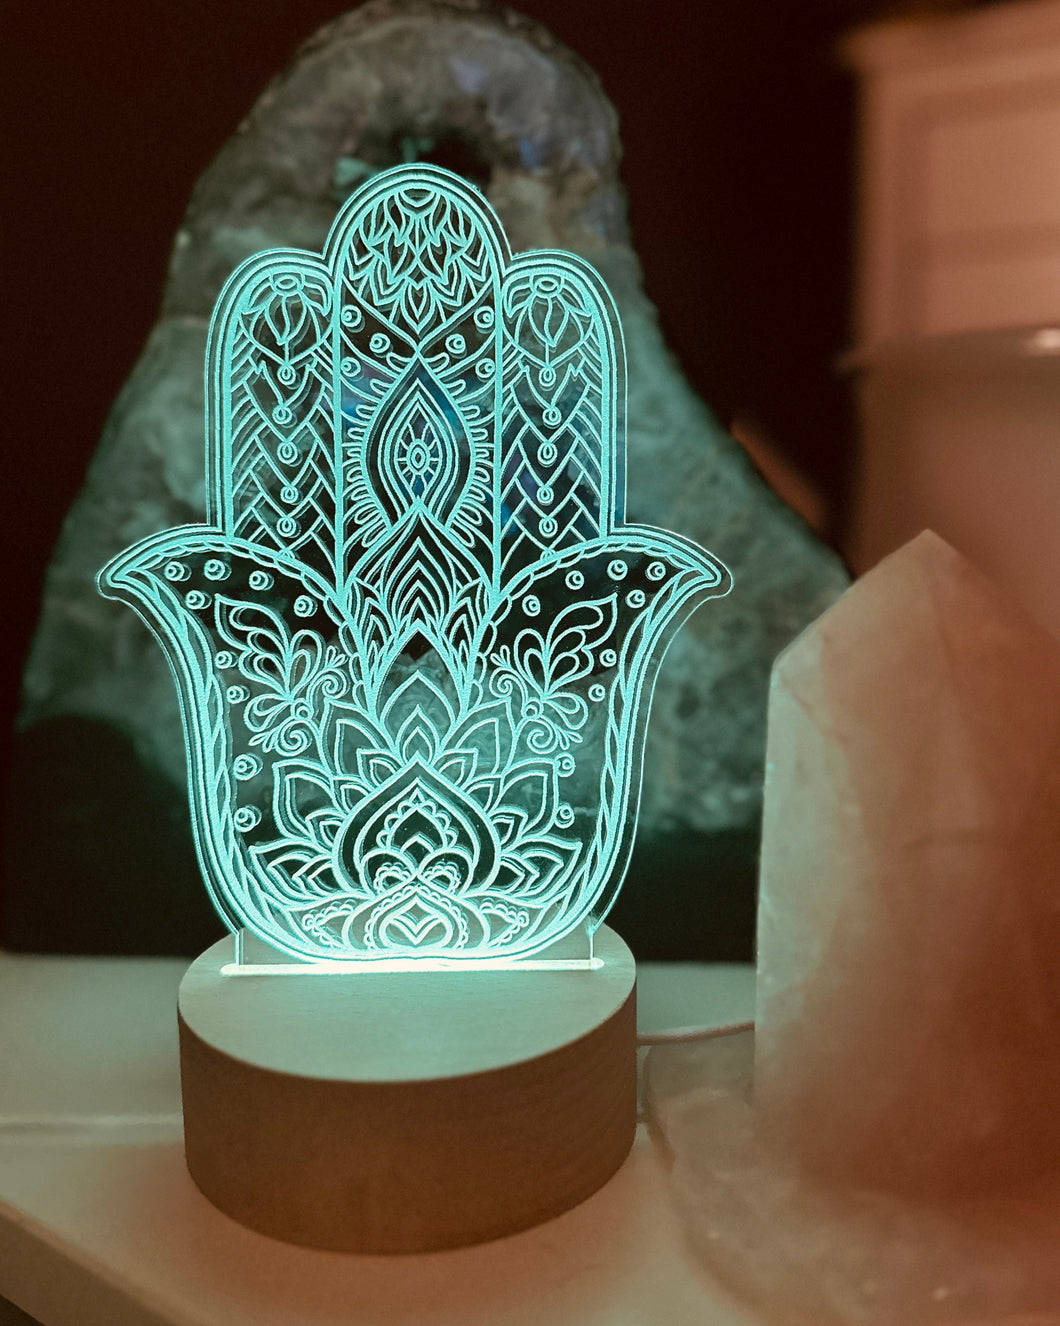 Hamsa Hand Sacred symbol of universal protection, power and strength - wooden led light base - universal usb connection